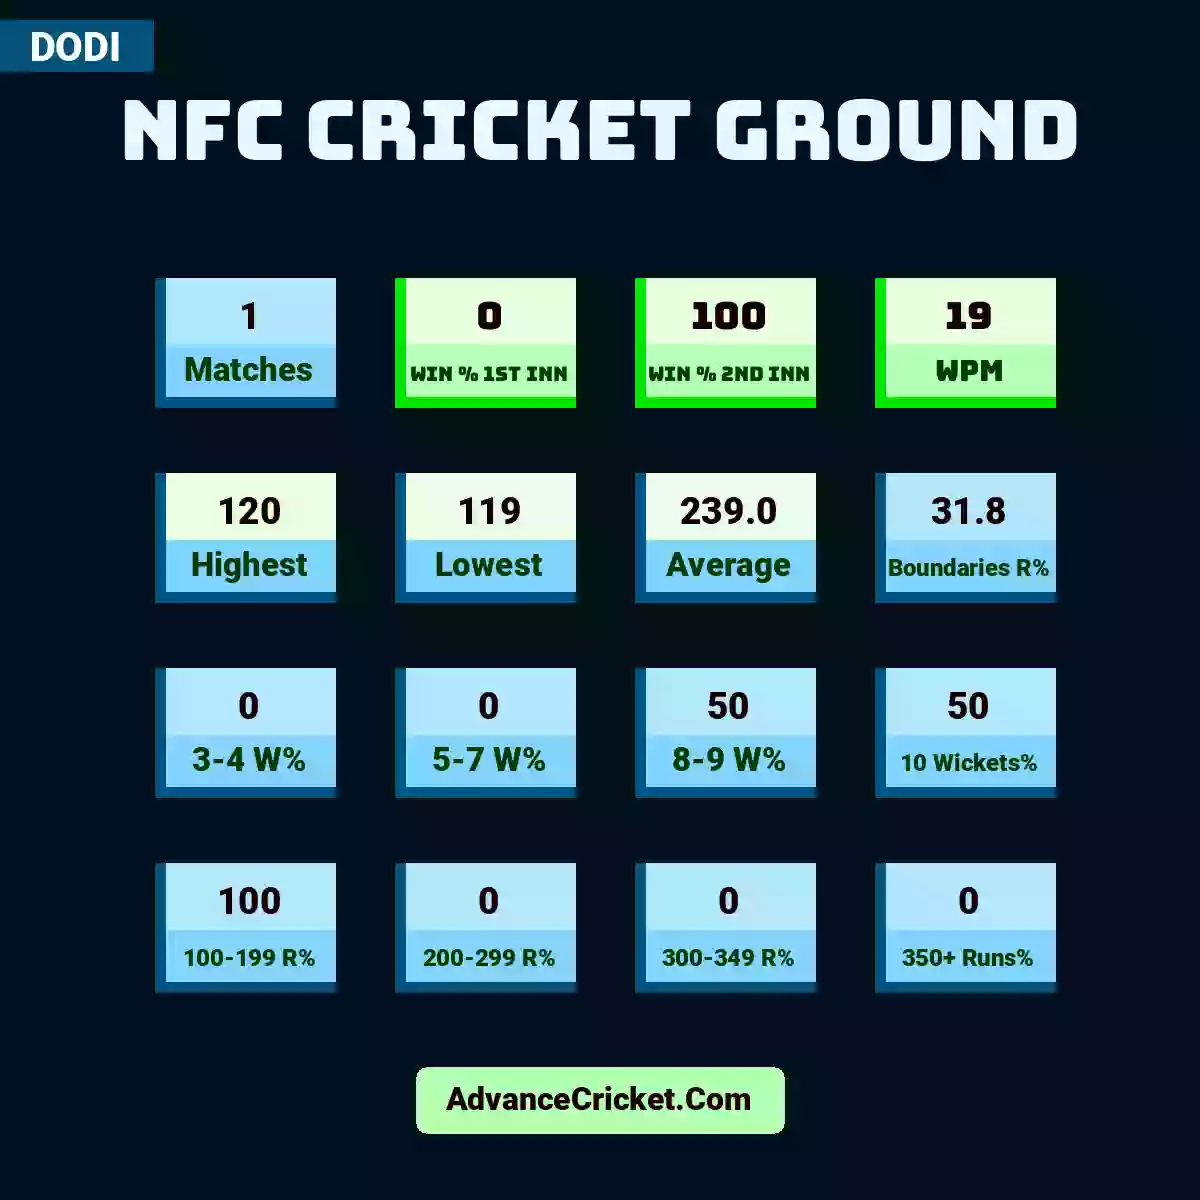 Image showing NFC Cricket Ground with Matches: 1, Win % 1st Inn: 0, Win % 2nd Inn: 100, WPM: 19, Highest: 120, Lowest: 119, Average: 239.0, Boundaries R%: 31.8, 3-4 W%: 0, 5-7 W%: 0, 8-9 W%: 50, 10 Wickets%: 50, 100-199 R%: 100, 200-299 R%: 0, 300-349 R%: 0, 350+ Runs%: 0.